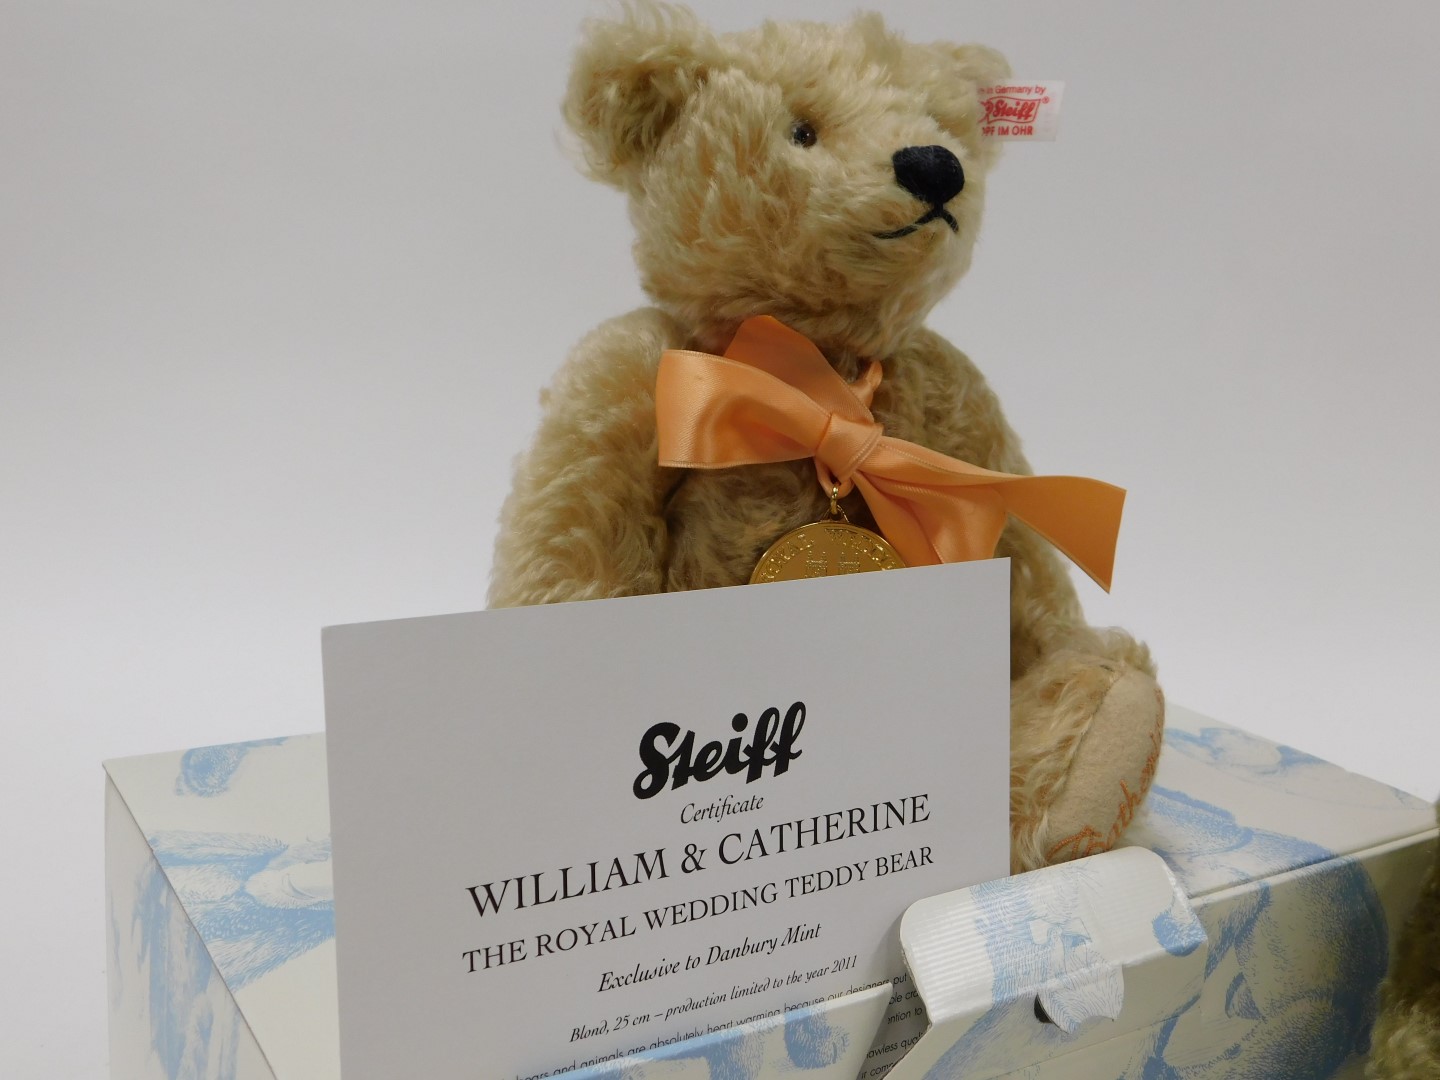 A Steiff William and Catherine The Royal Wedding Teddy bear, exclusive to Danbury Mint, limited edit - Image 2 of 3